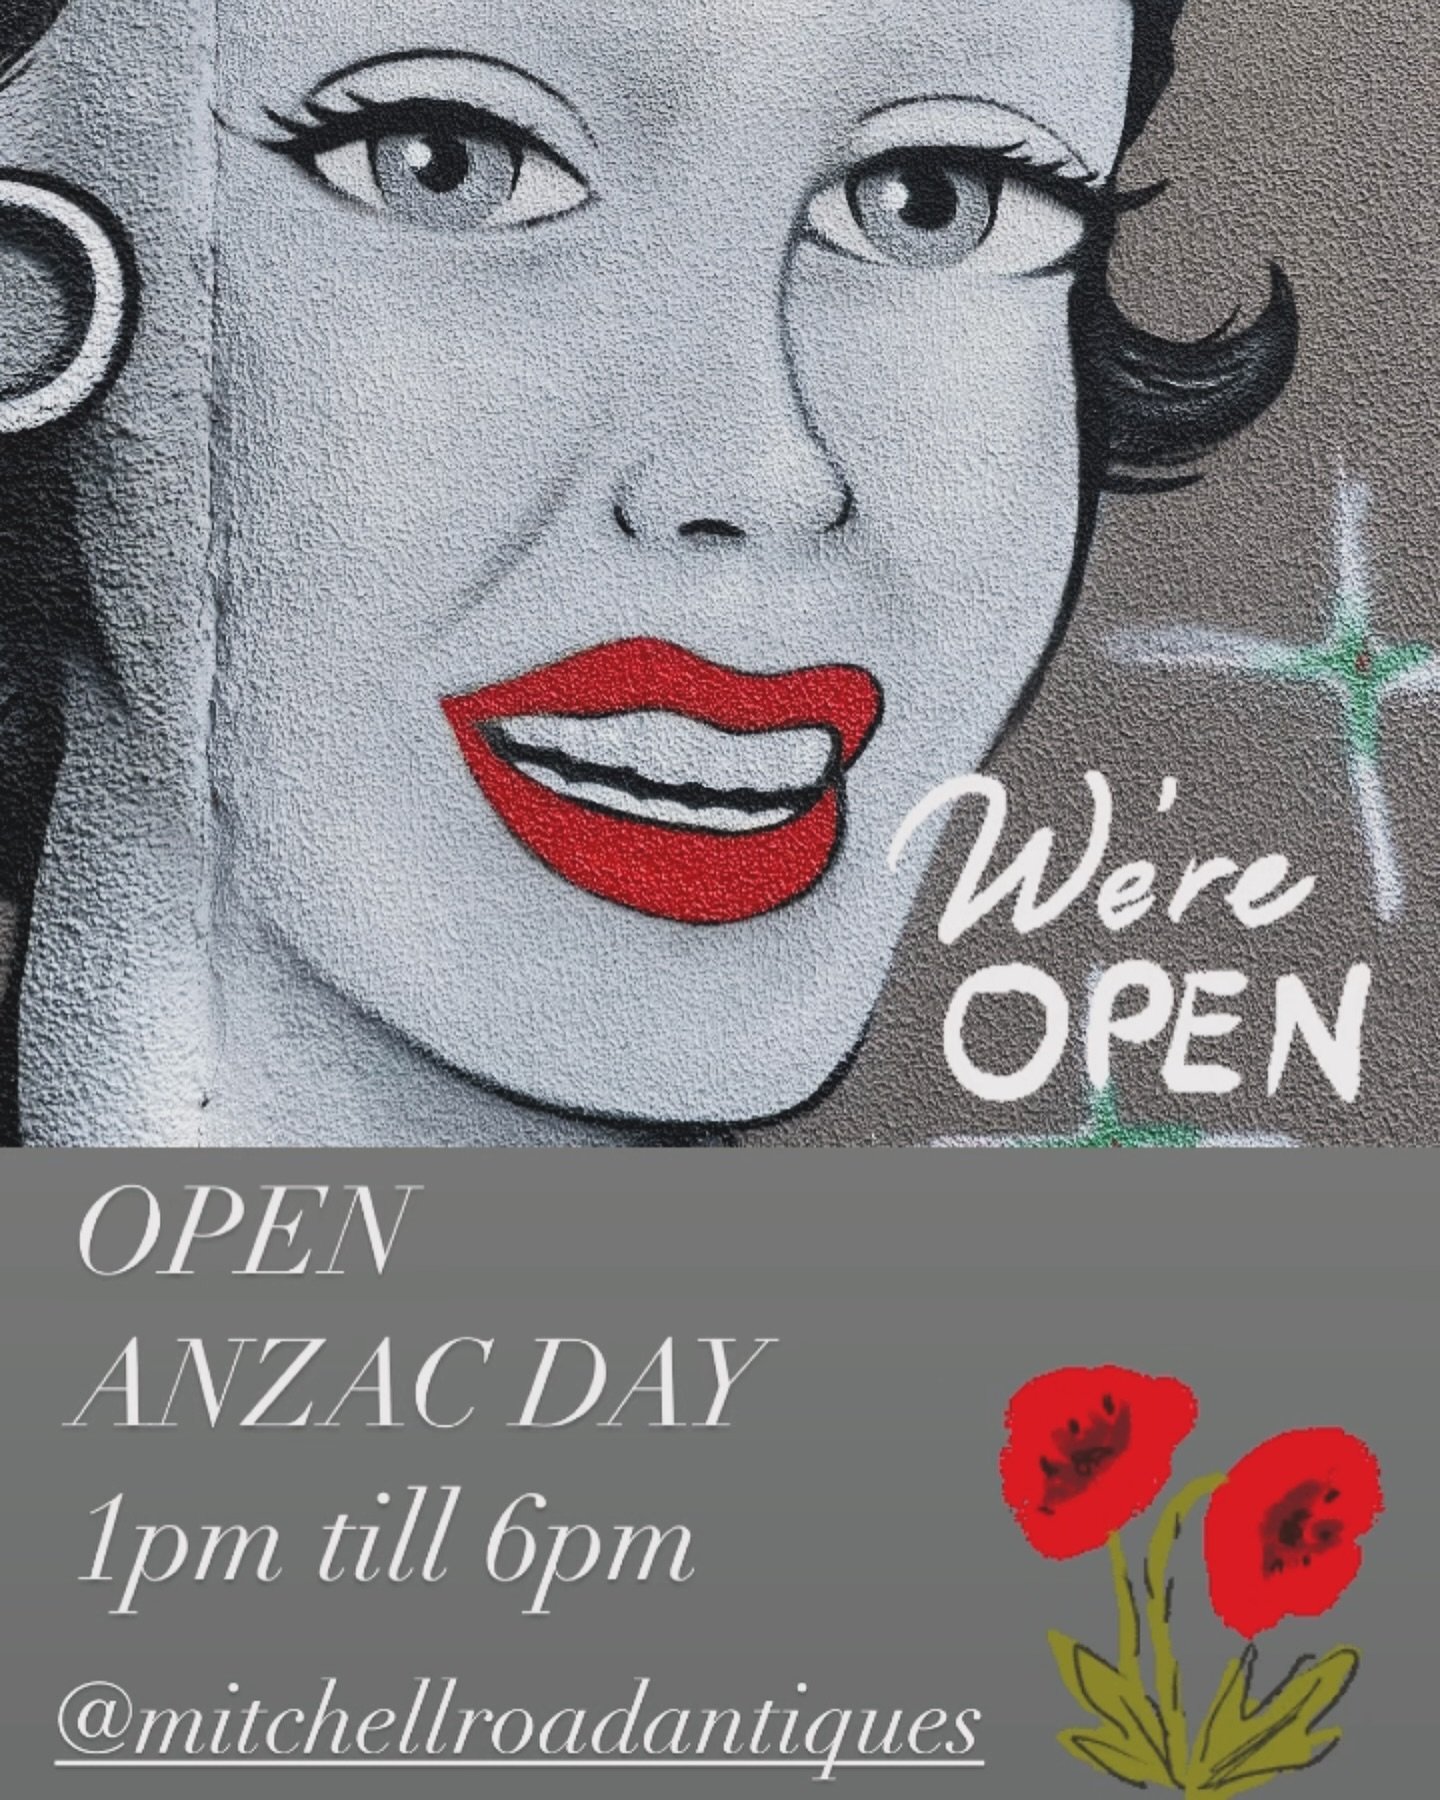 We are OPEN ANZAC DAY
@mitchellroadantiques 
🔐 Hours - 1pm till 6 pm

17 Bourke Road, Alexandria NSW 2015
📱 0418160727

🚗Parking on site 

🐶Dog friendly 

#anzacday #vintage #antiques #retro #mitchellrdantiqueanddesigncentre #weareopen #weareopen